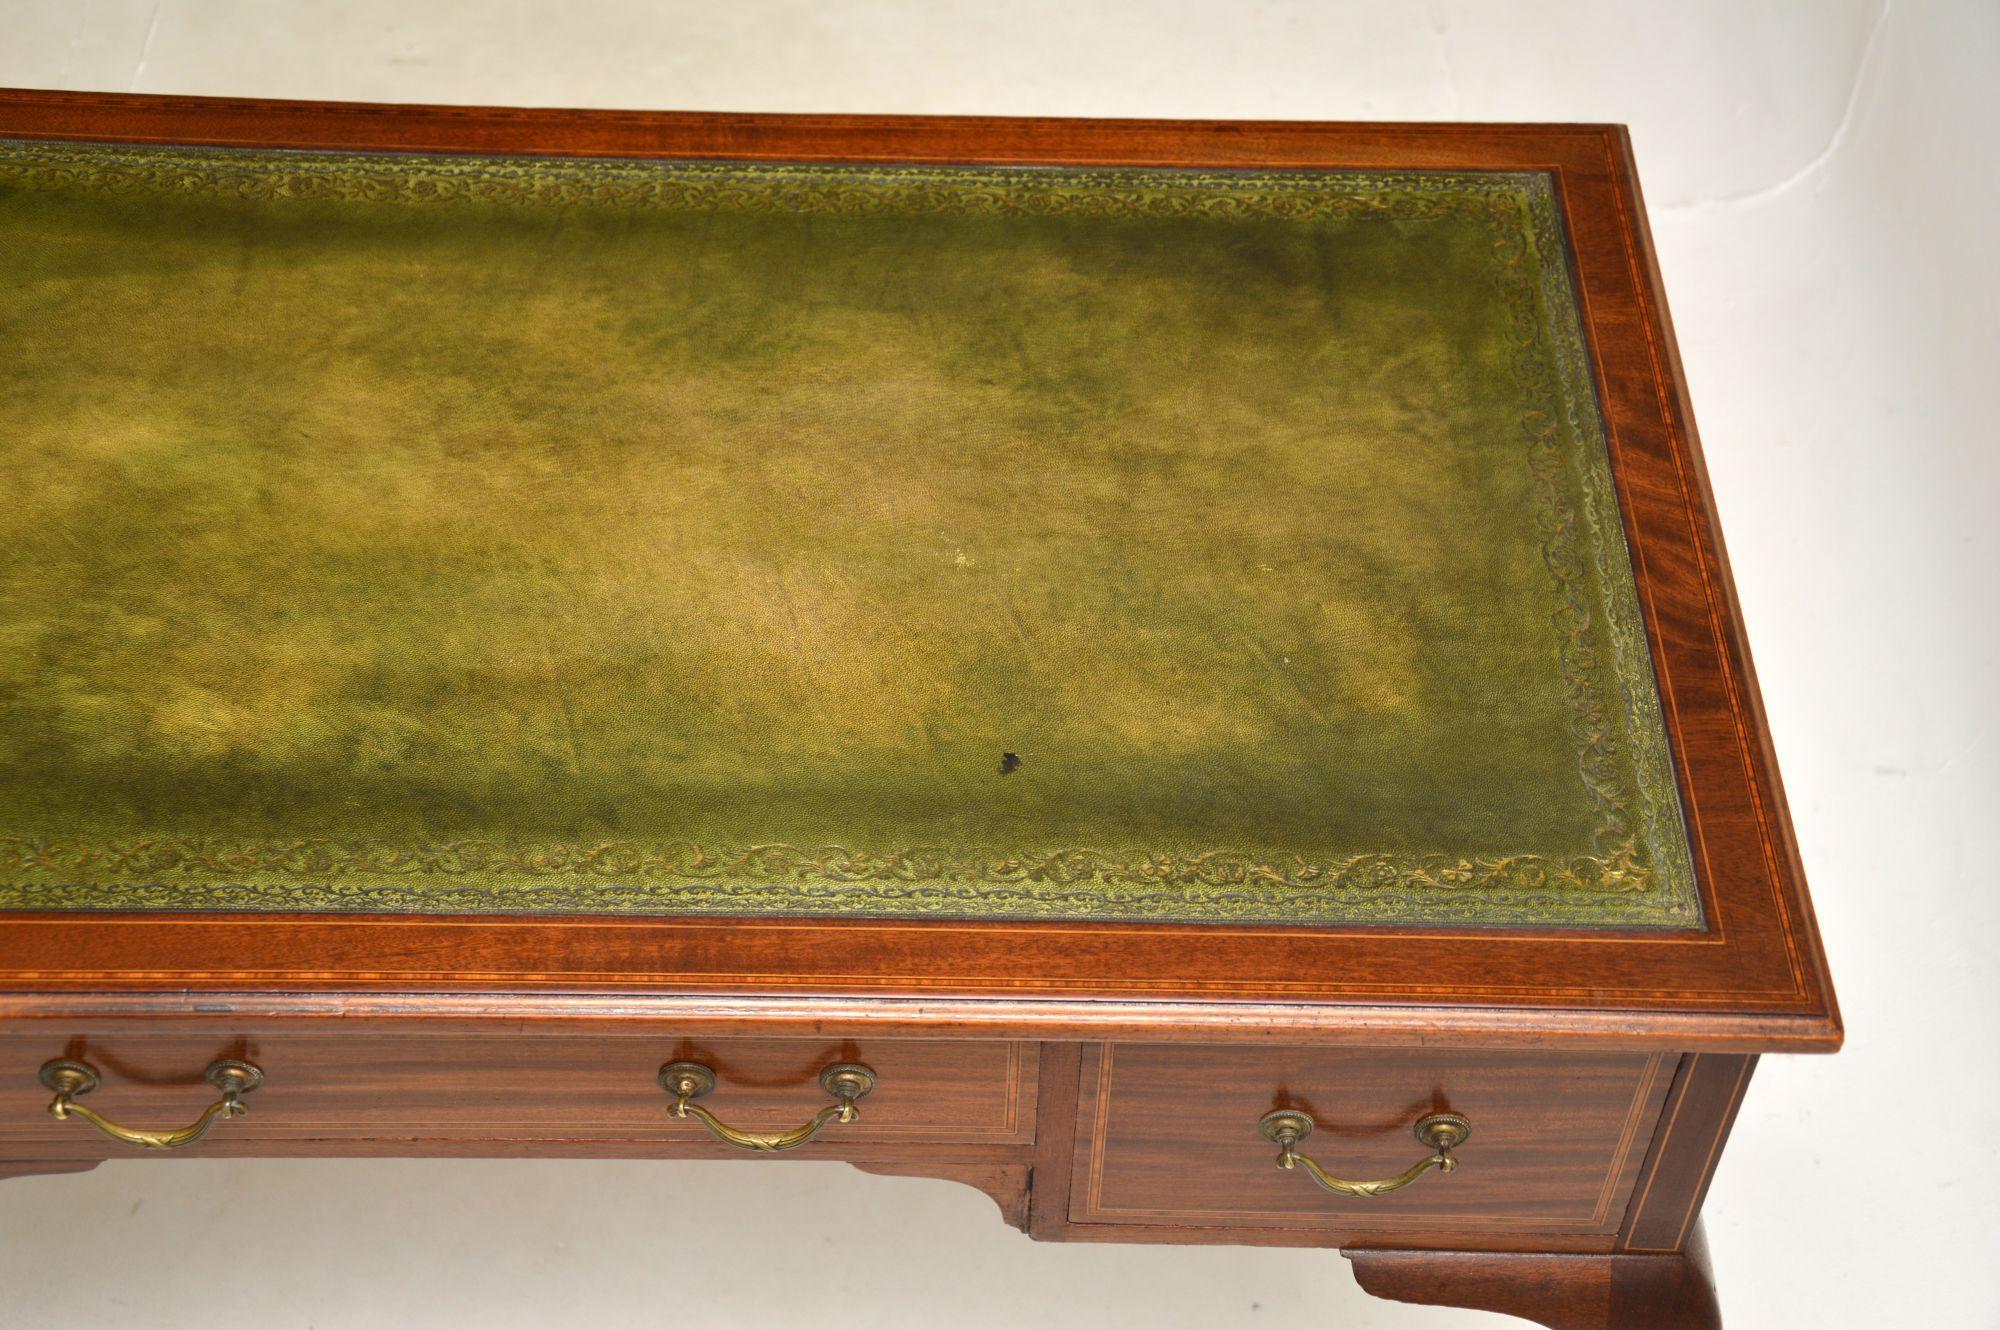 Antique Edwardian Inlaid Desk by Maple & Co For Sale 1